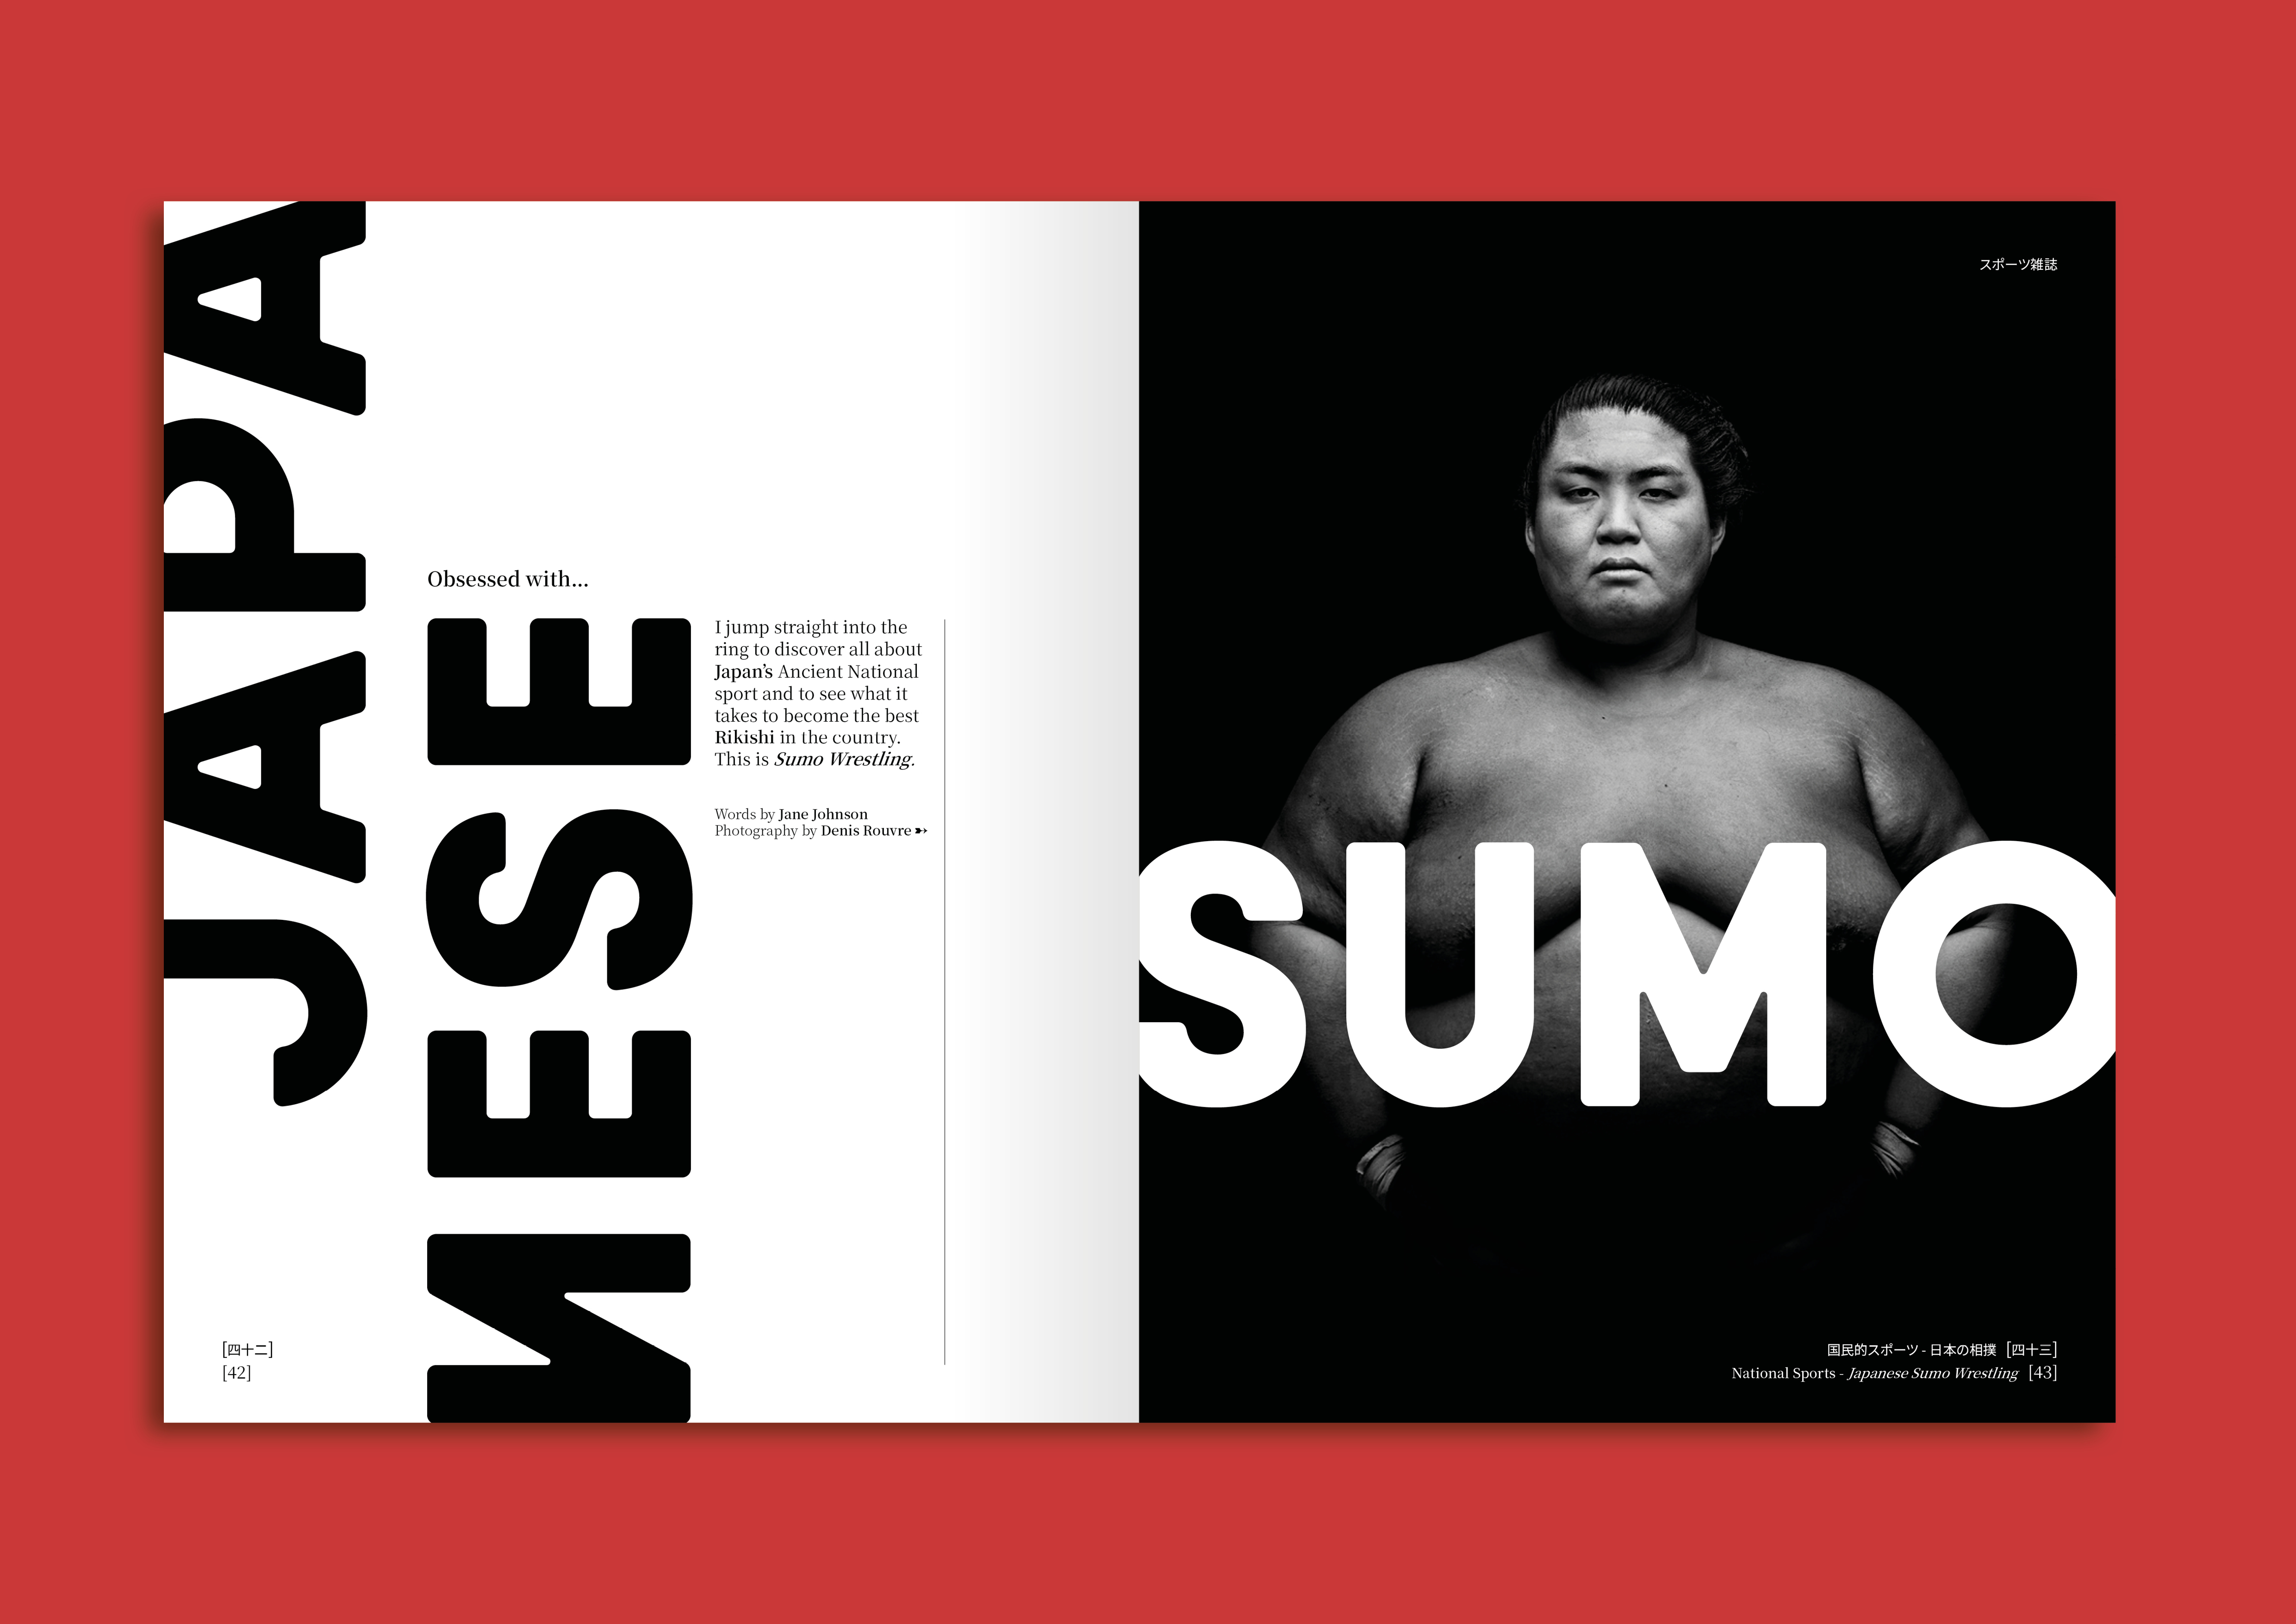 Editorial spread design by Ben Dale showcasing his typesetting skills and use of bold typography.